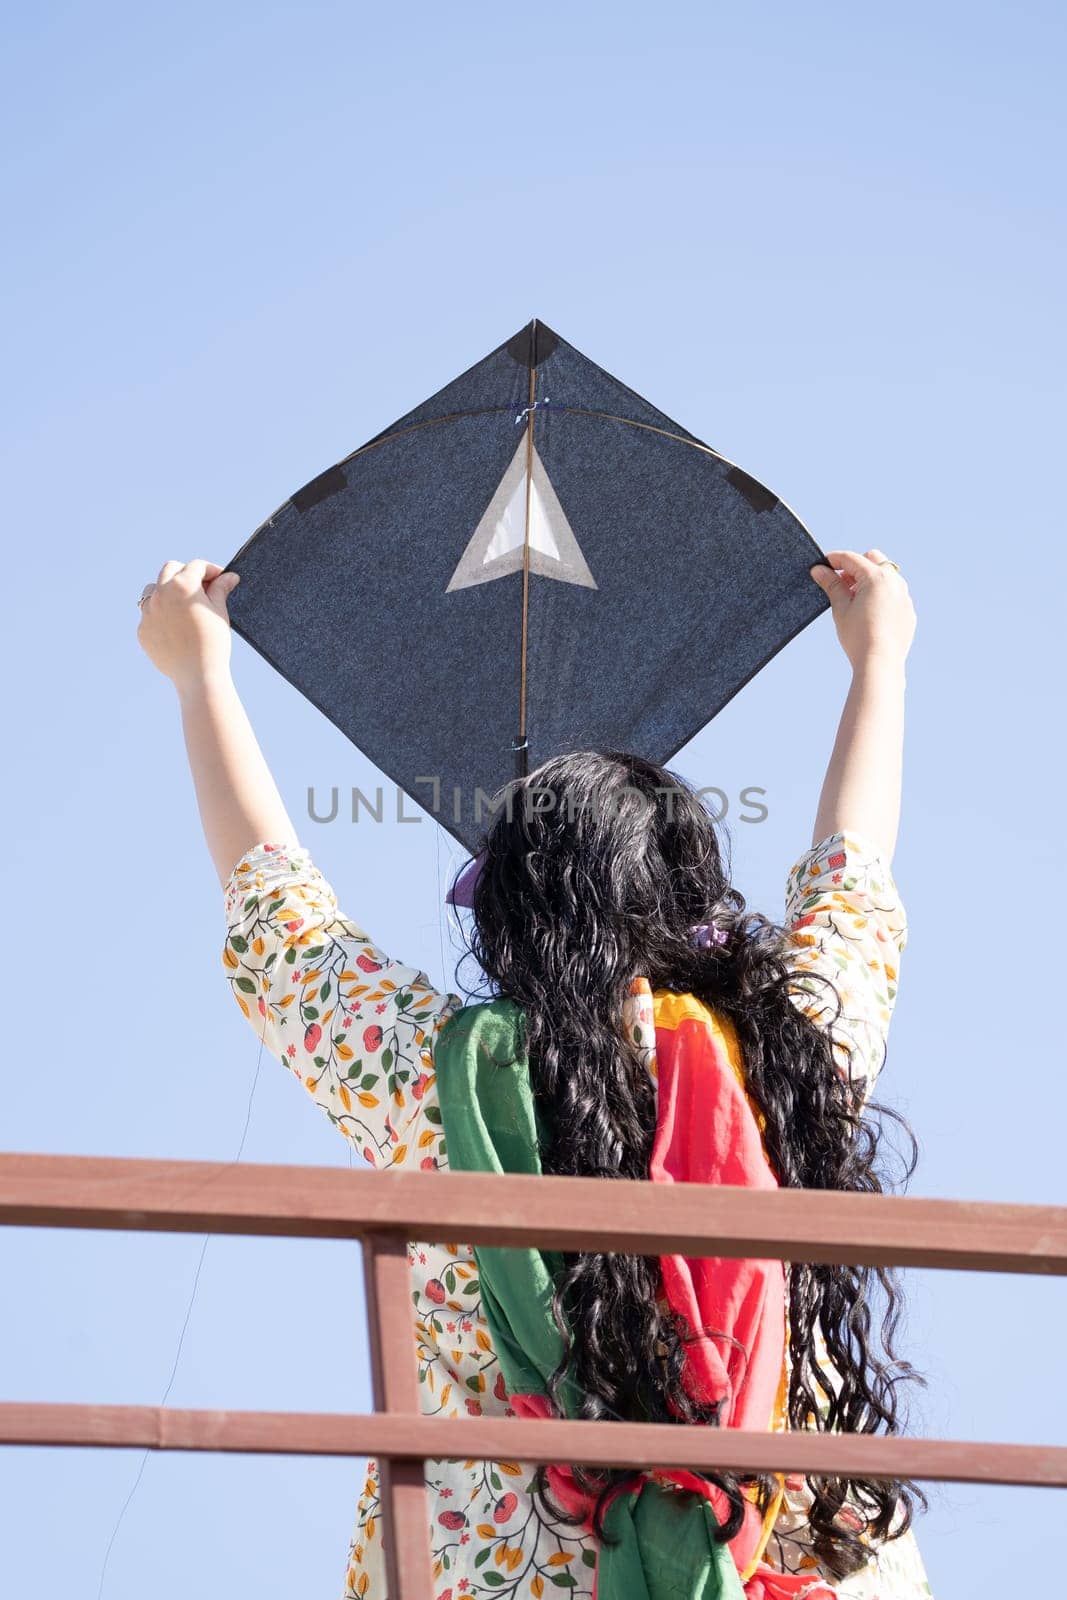 Young girl in traditional indian clothing holding black kite high above head launching it on sankranti republic independence day celebrations by Shalinimathur